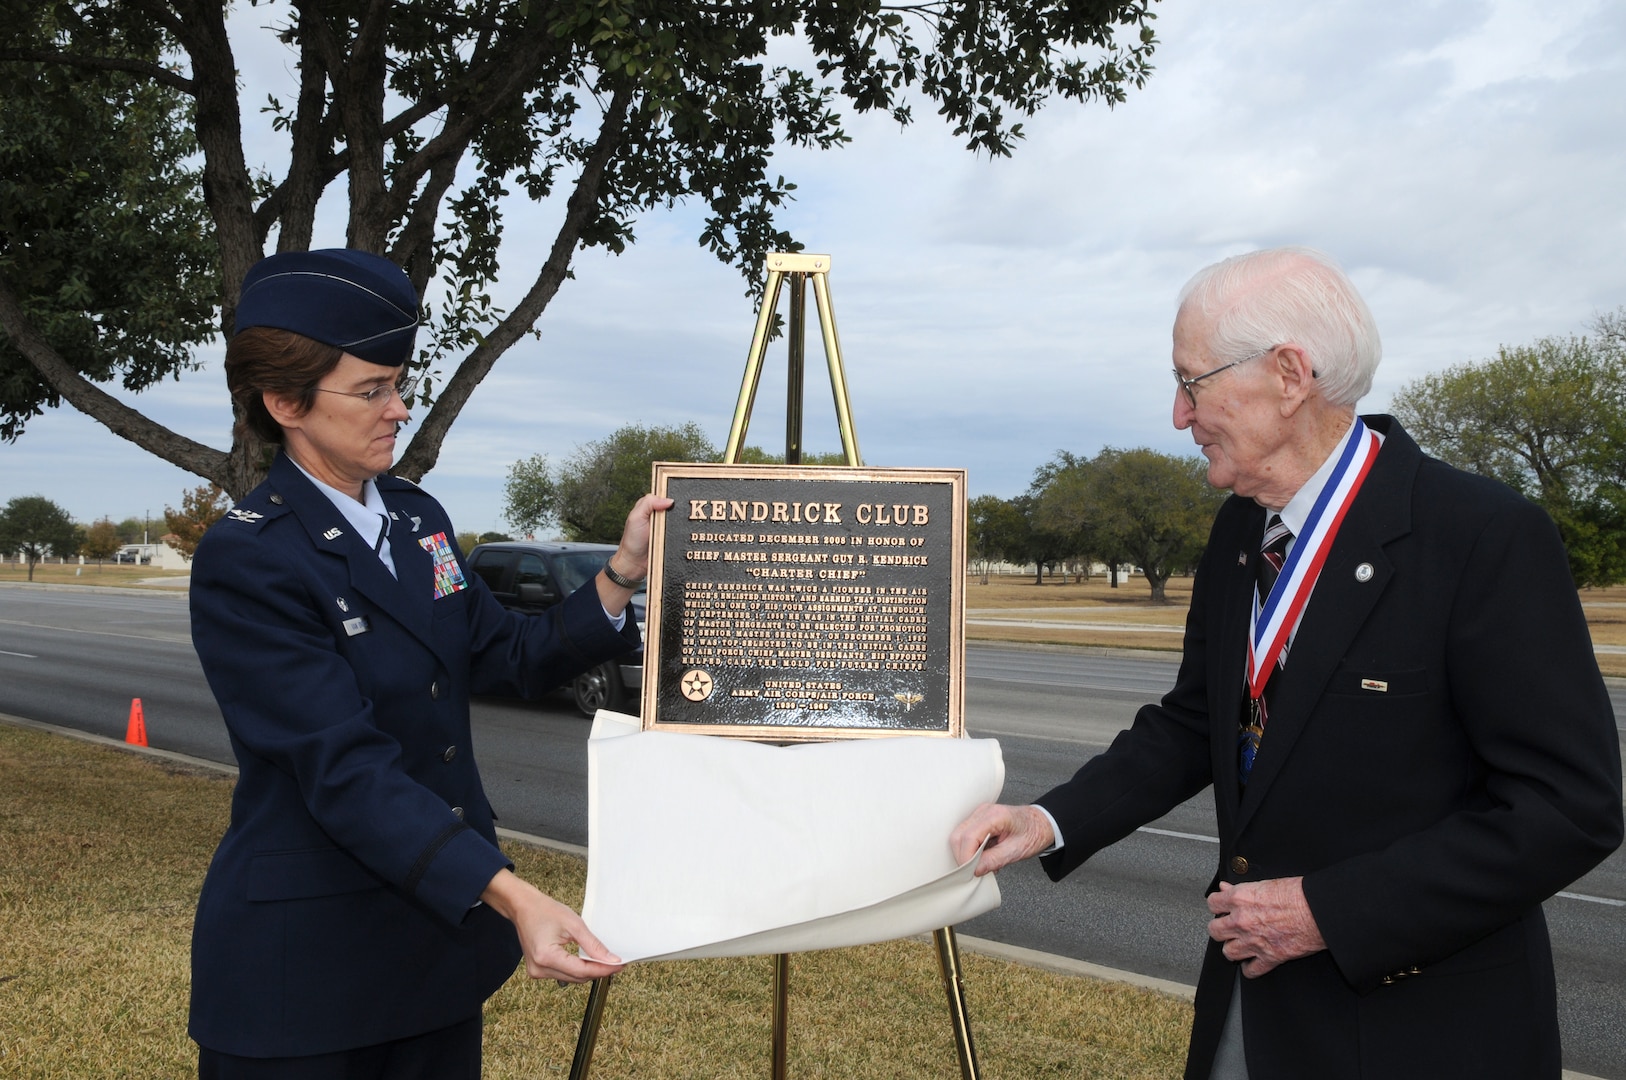 Col. Jacqueline Van Ovost, 12th Flying Traning Wing commander, and retired Chief Master Sgt. Guy Kendrick unveil the plaque redesignating the Randolph Air Force Base Enlisted Club as the "Kendrick Club." (U.S. Air Force photo by Rich McFadden)